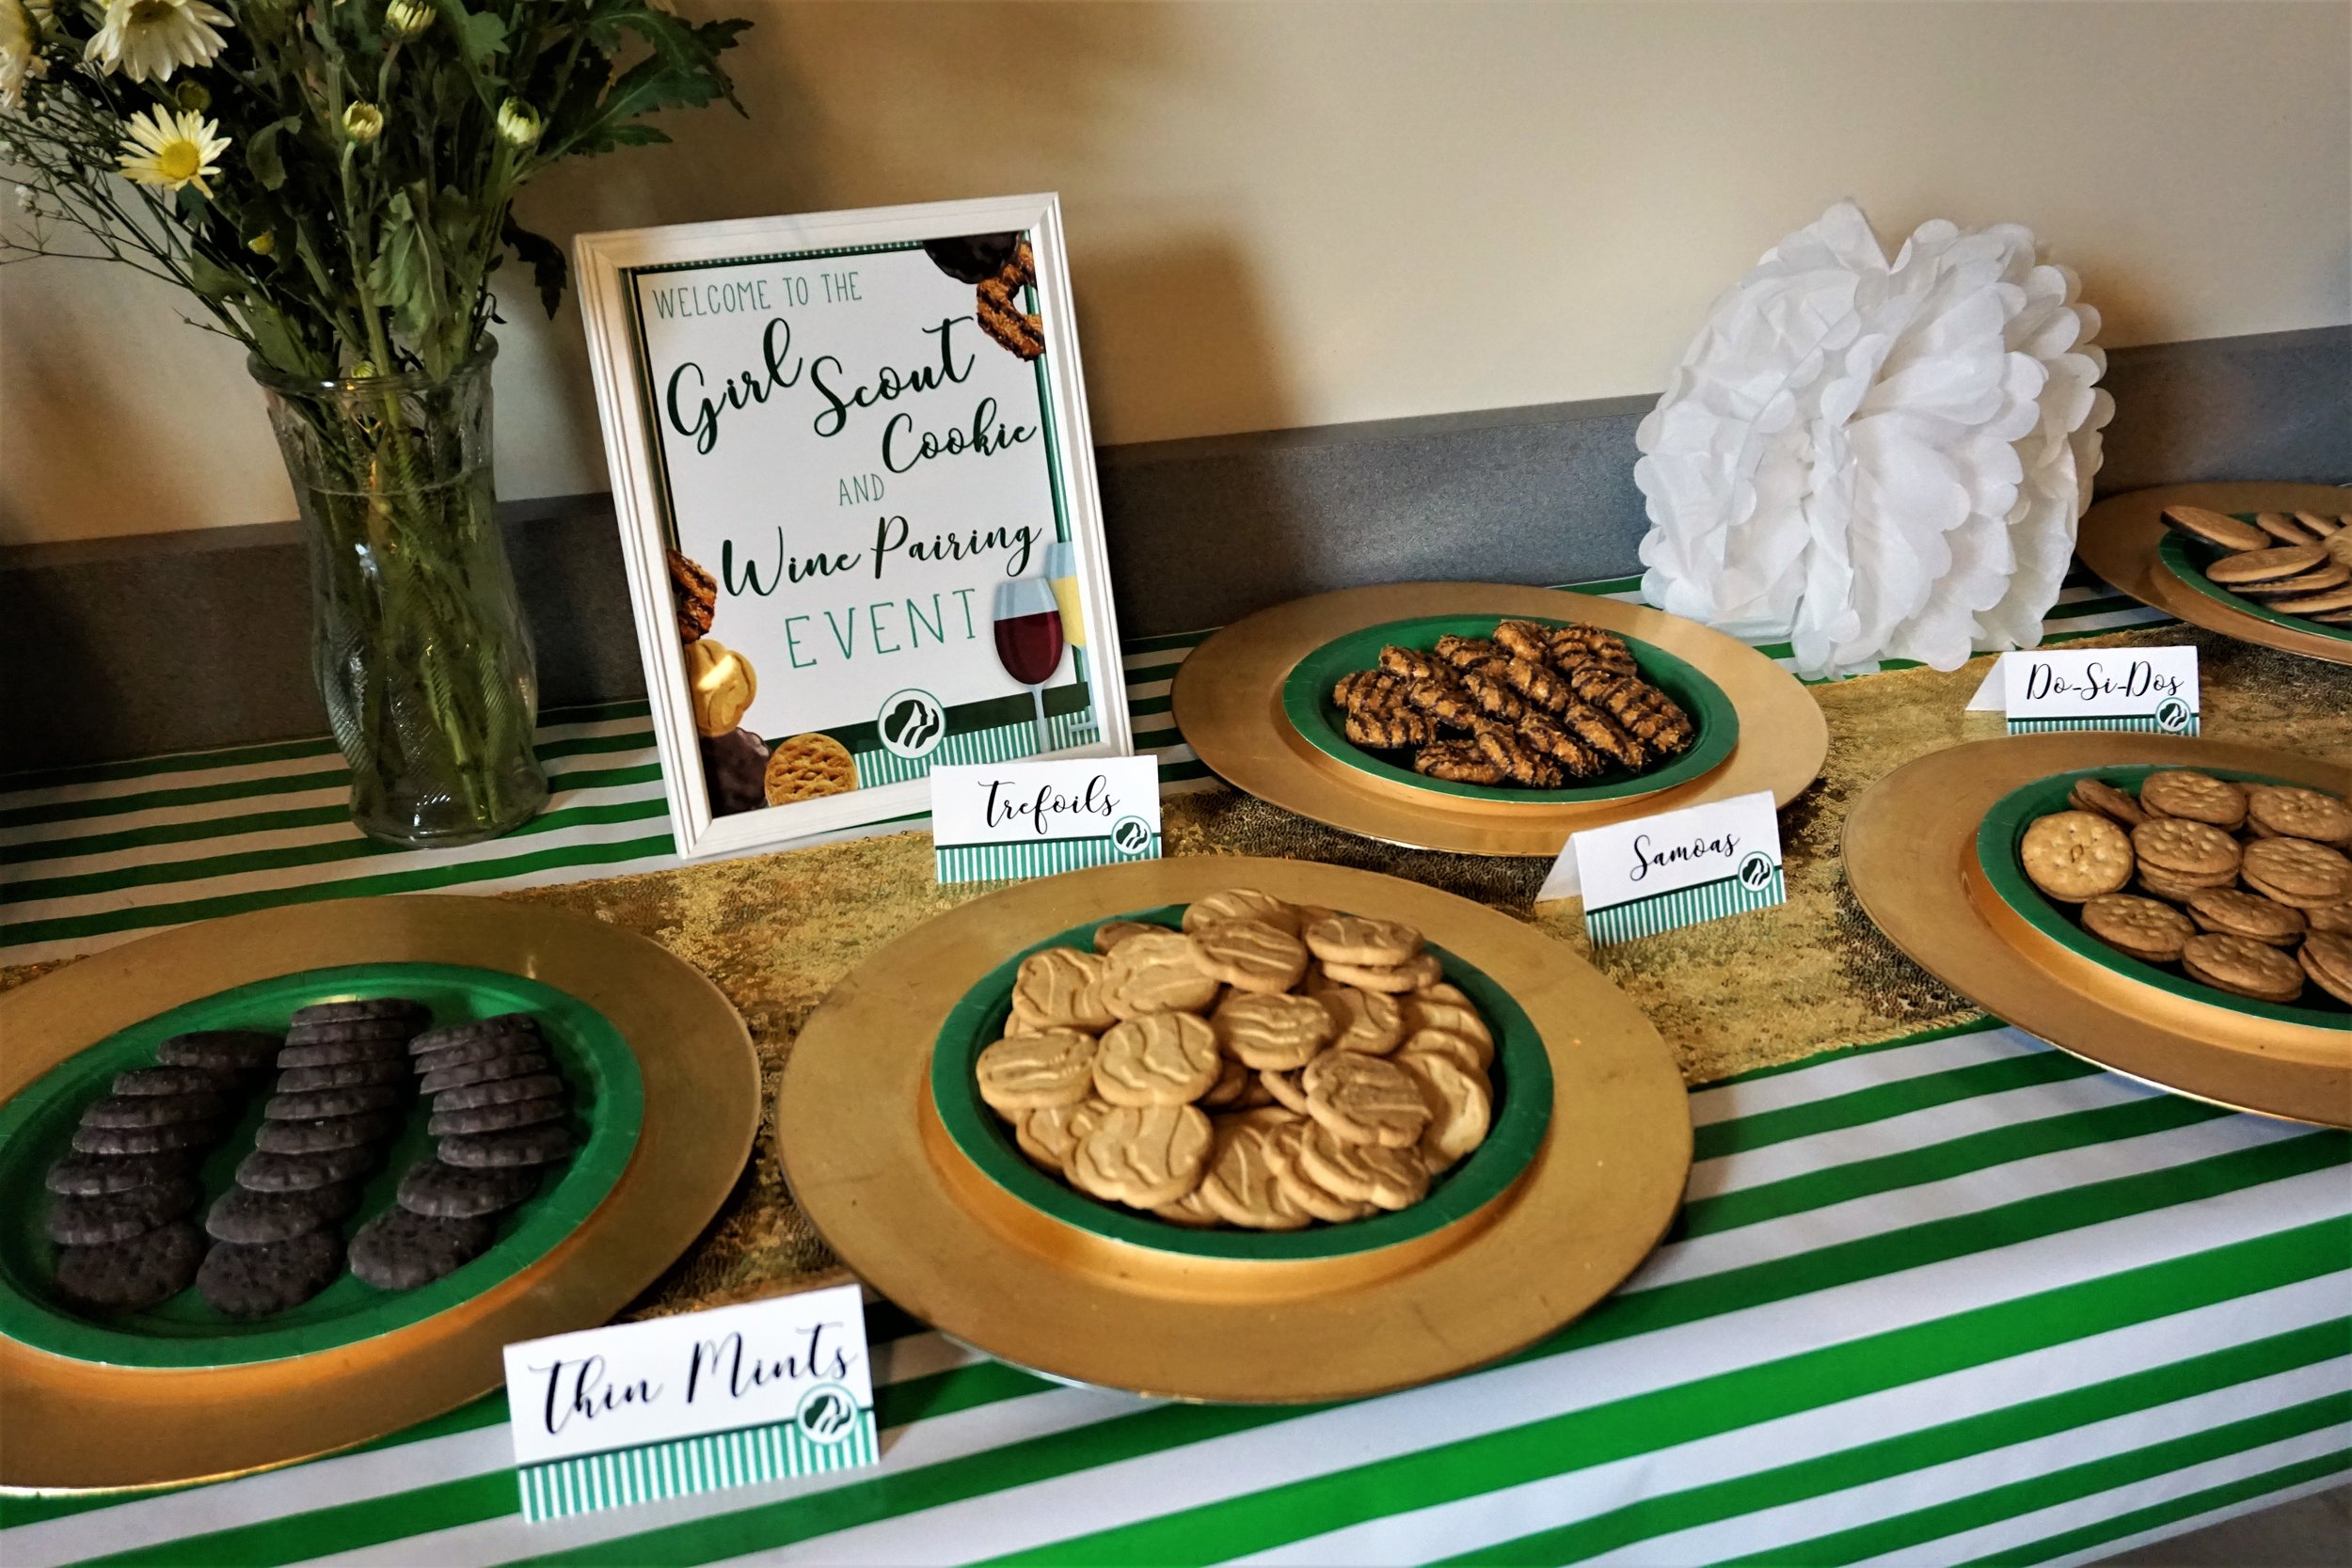  Use gold chargers and green plates to serve Girl Scout cookies at a Girl Scout cookie and wine pairing party. 